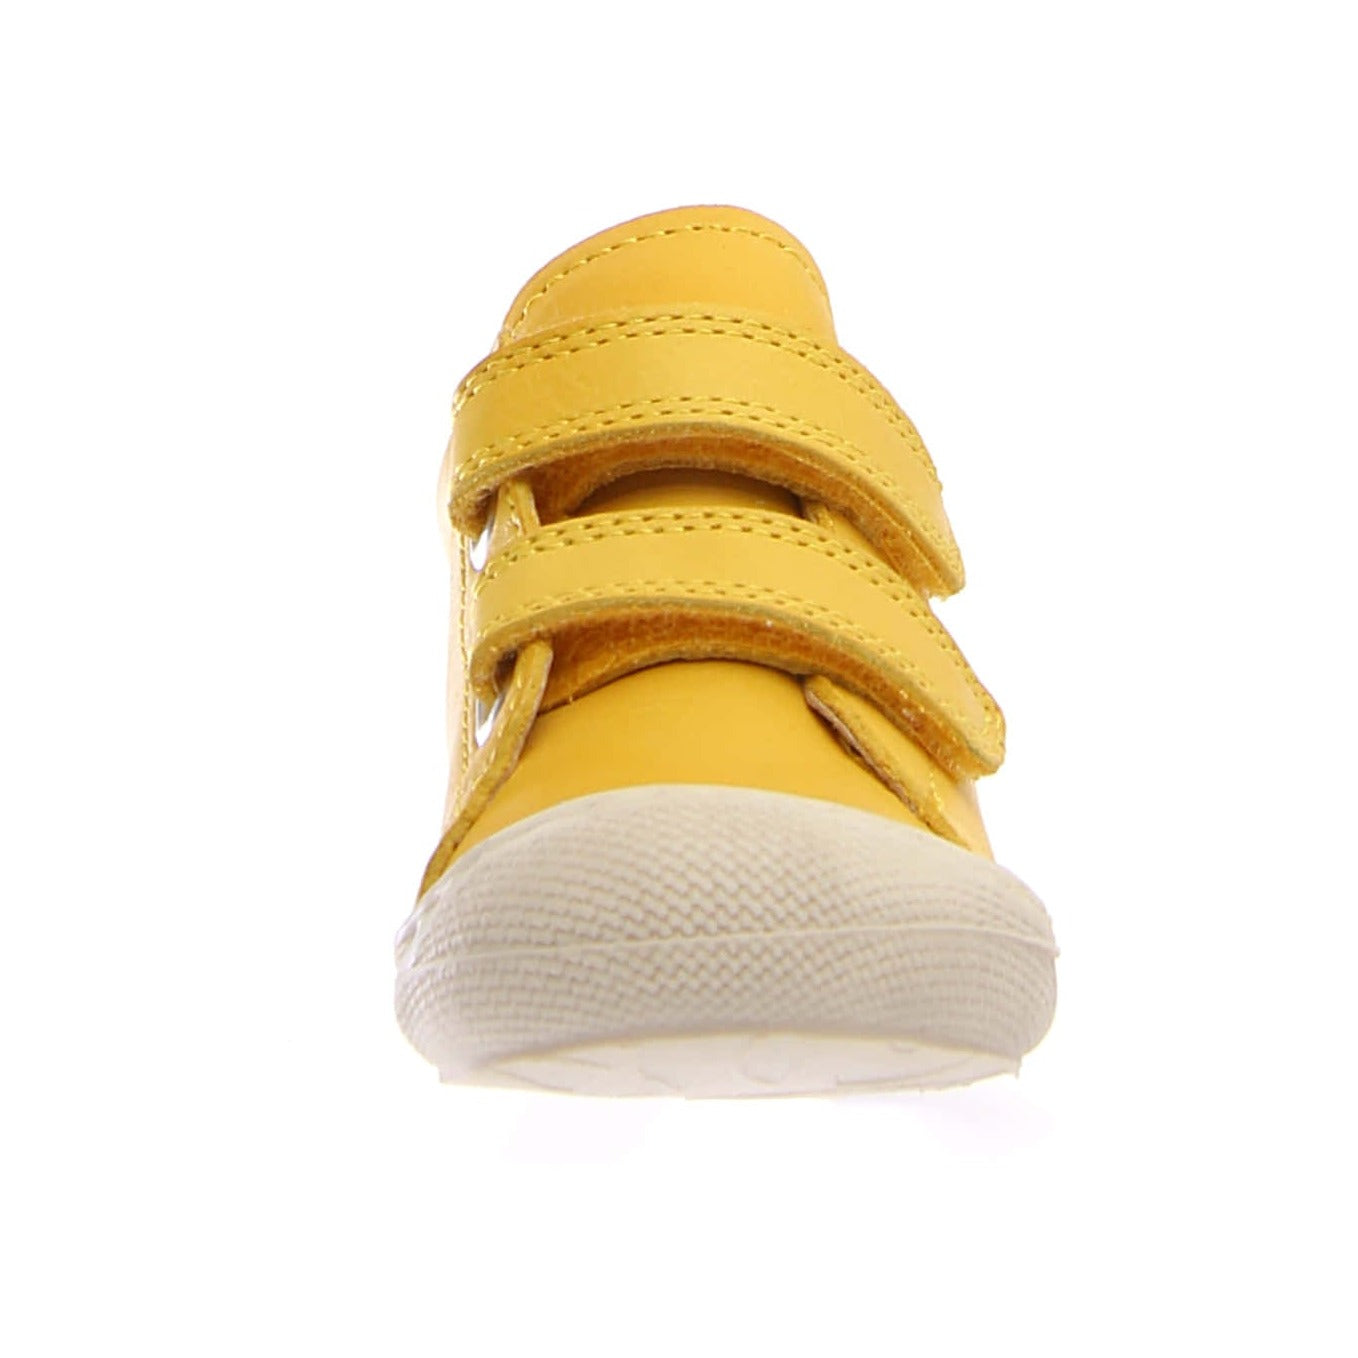 Naturino Cocoon VL - Nappa Leather First Step Shoes - Yellow